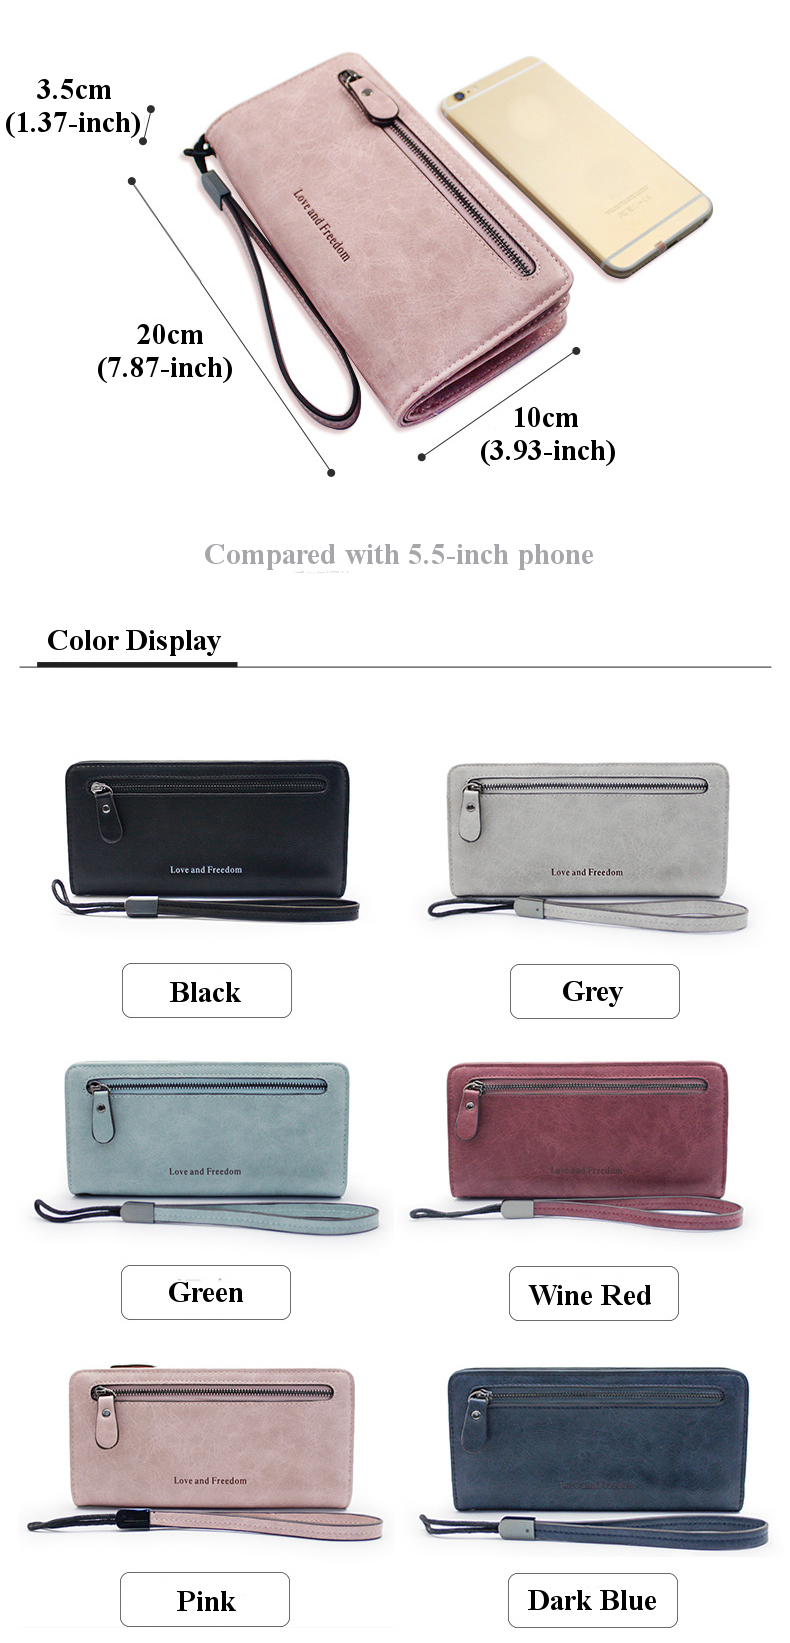 Universal Large Capacity Card Slot Long Purse Clutch Phone Wallet for Phone Under 5.5-inch